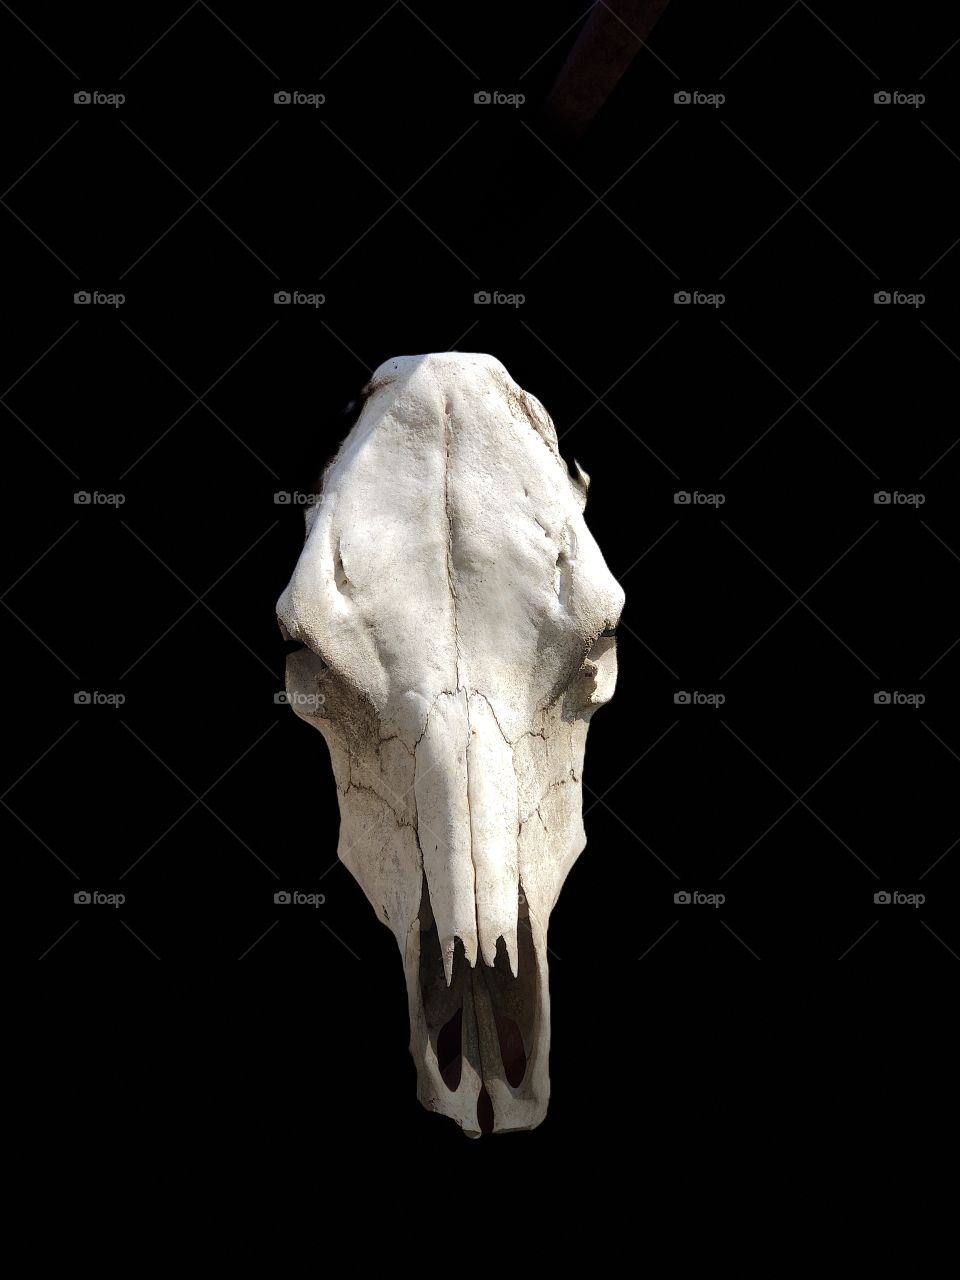 A horse skeleton with black background